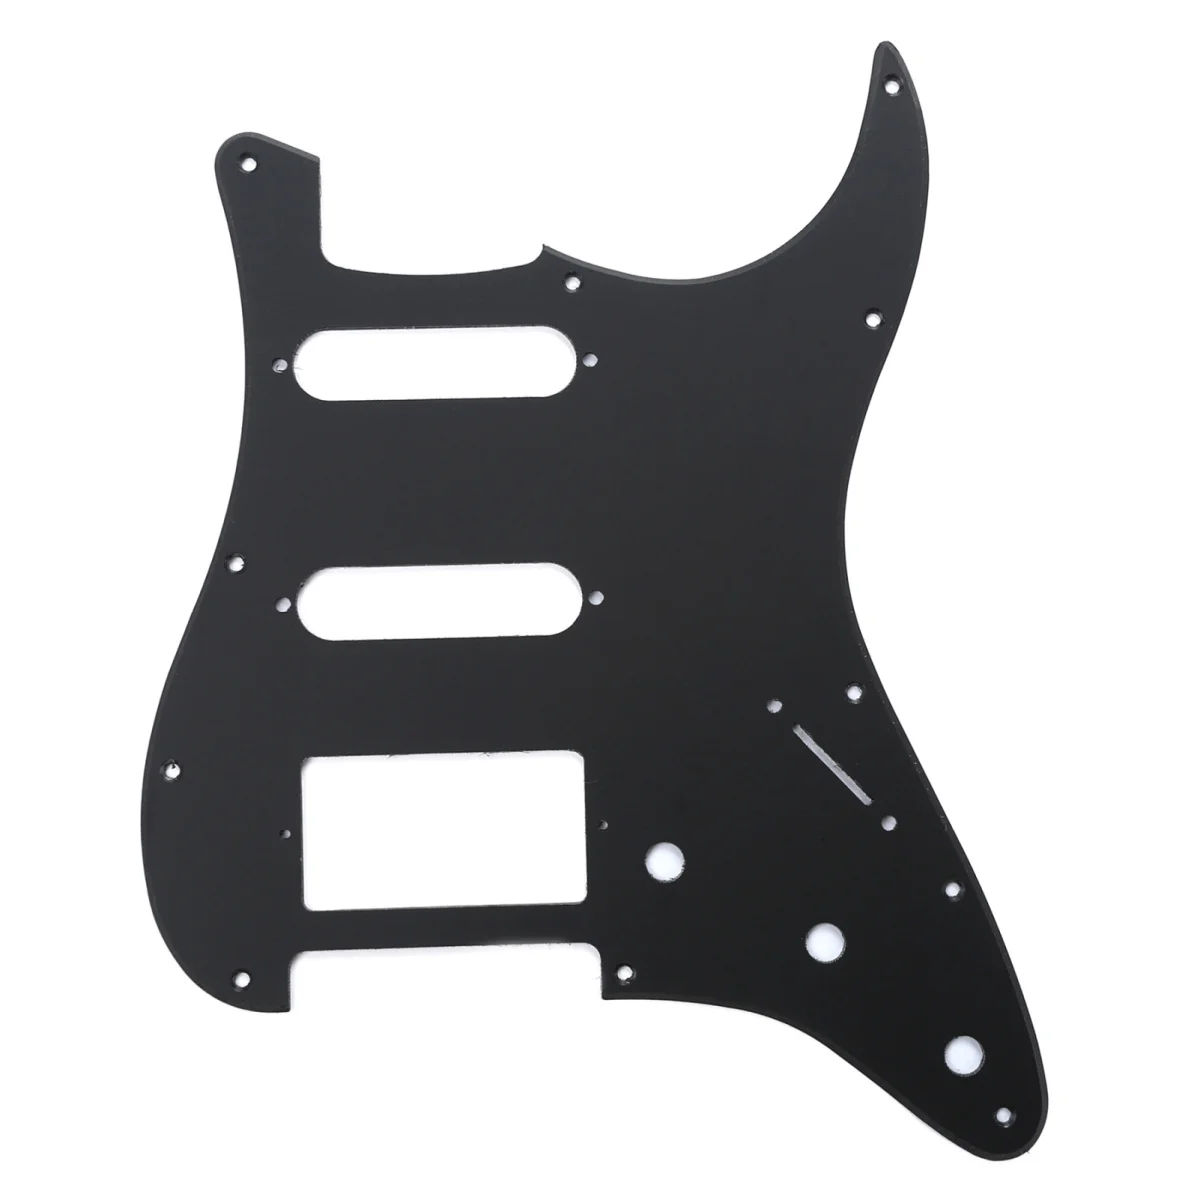 

Musiclily HSS 11 Hole Guitar Strat Pickguard for Fender USA/Mexican Made Standard Stratocaster Modern Style, 1Ply Matte Black